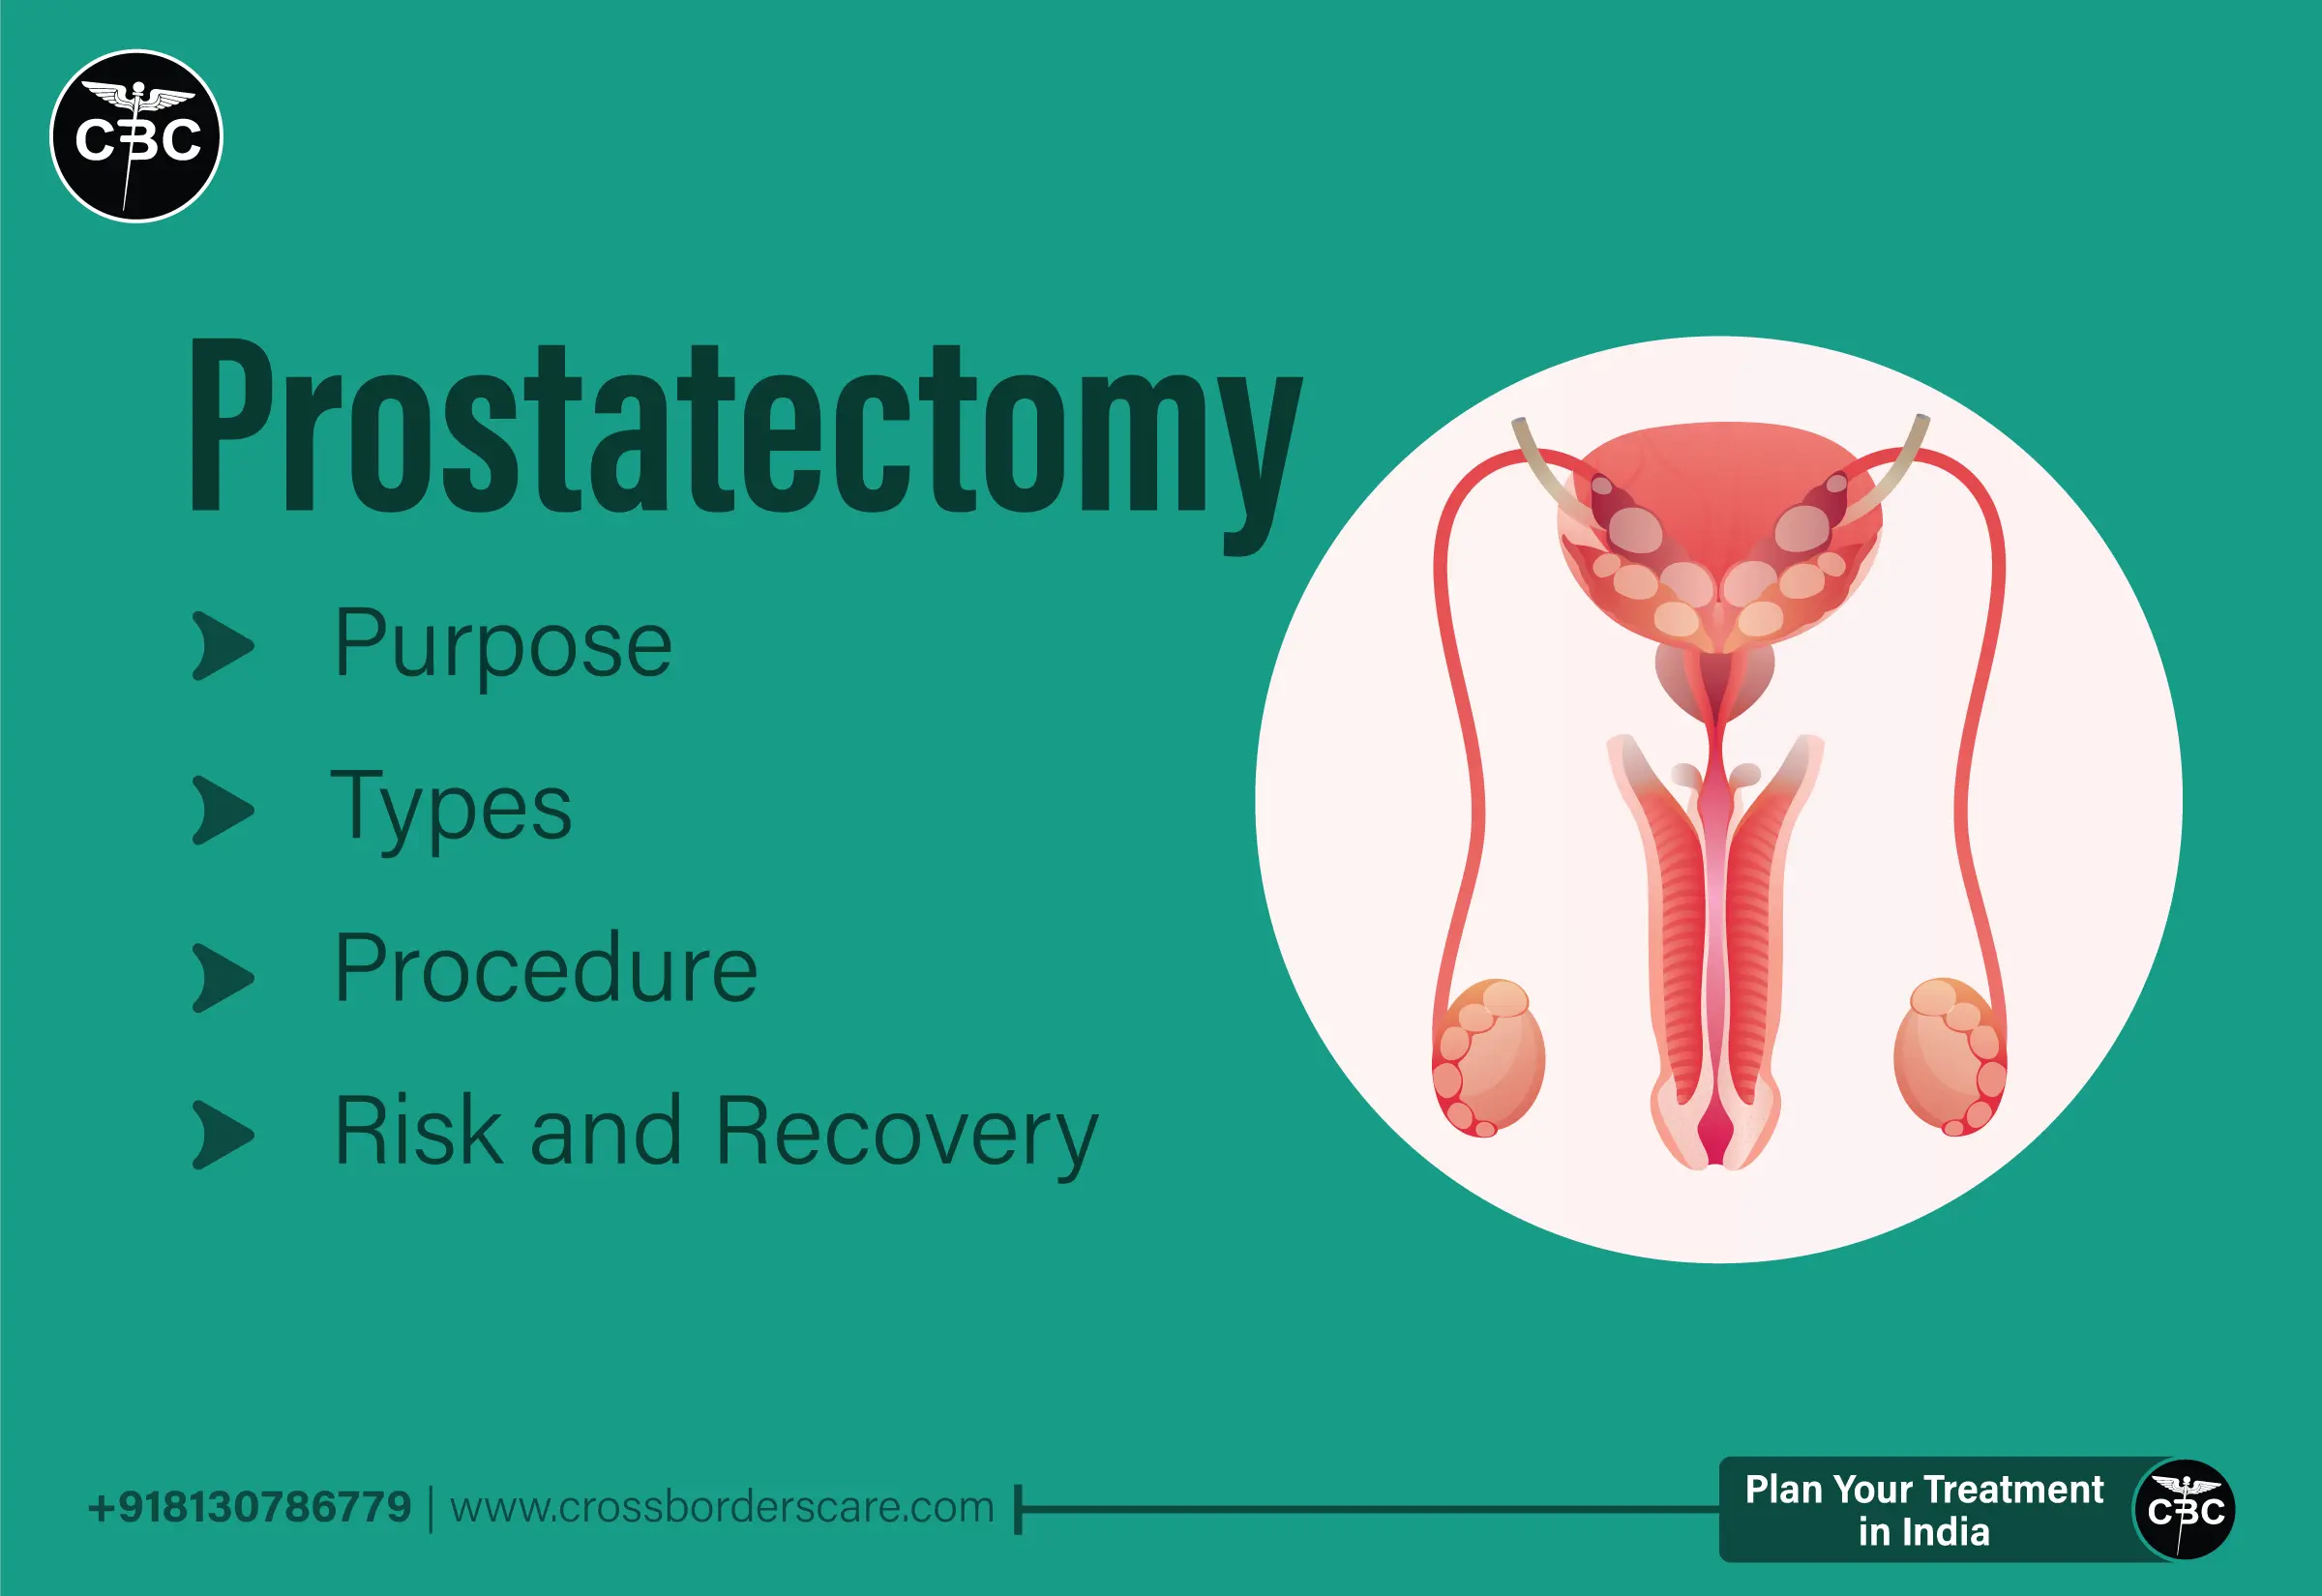 Prostatectomy Purpose Types Procedure Risk And Recovery 4218